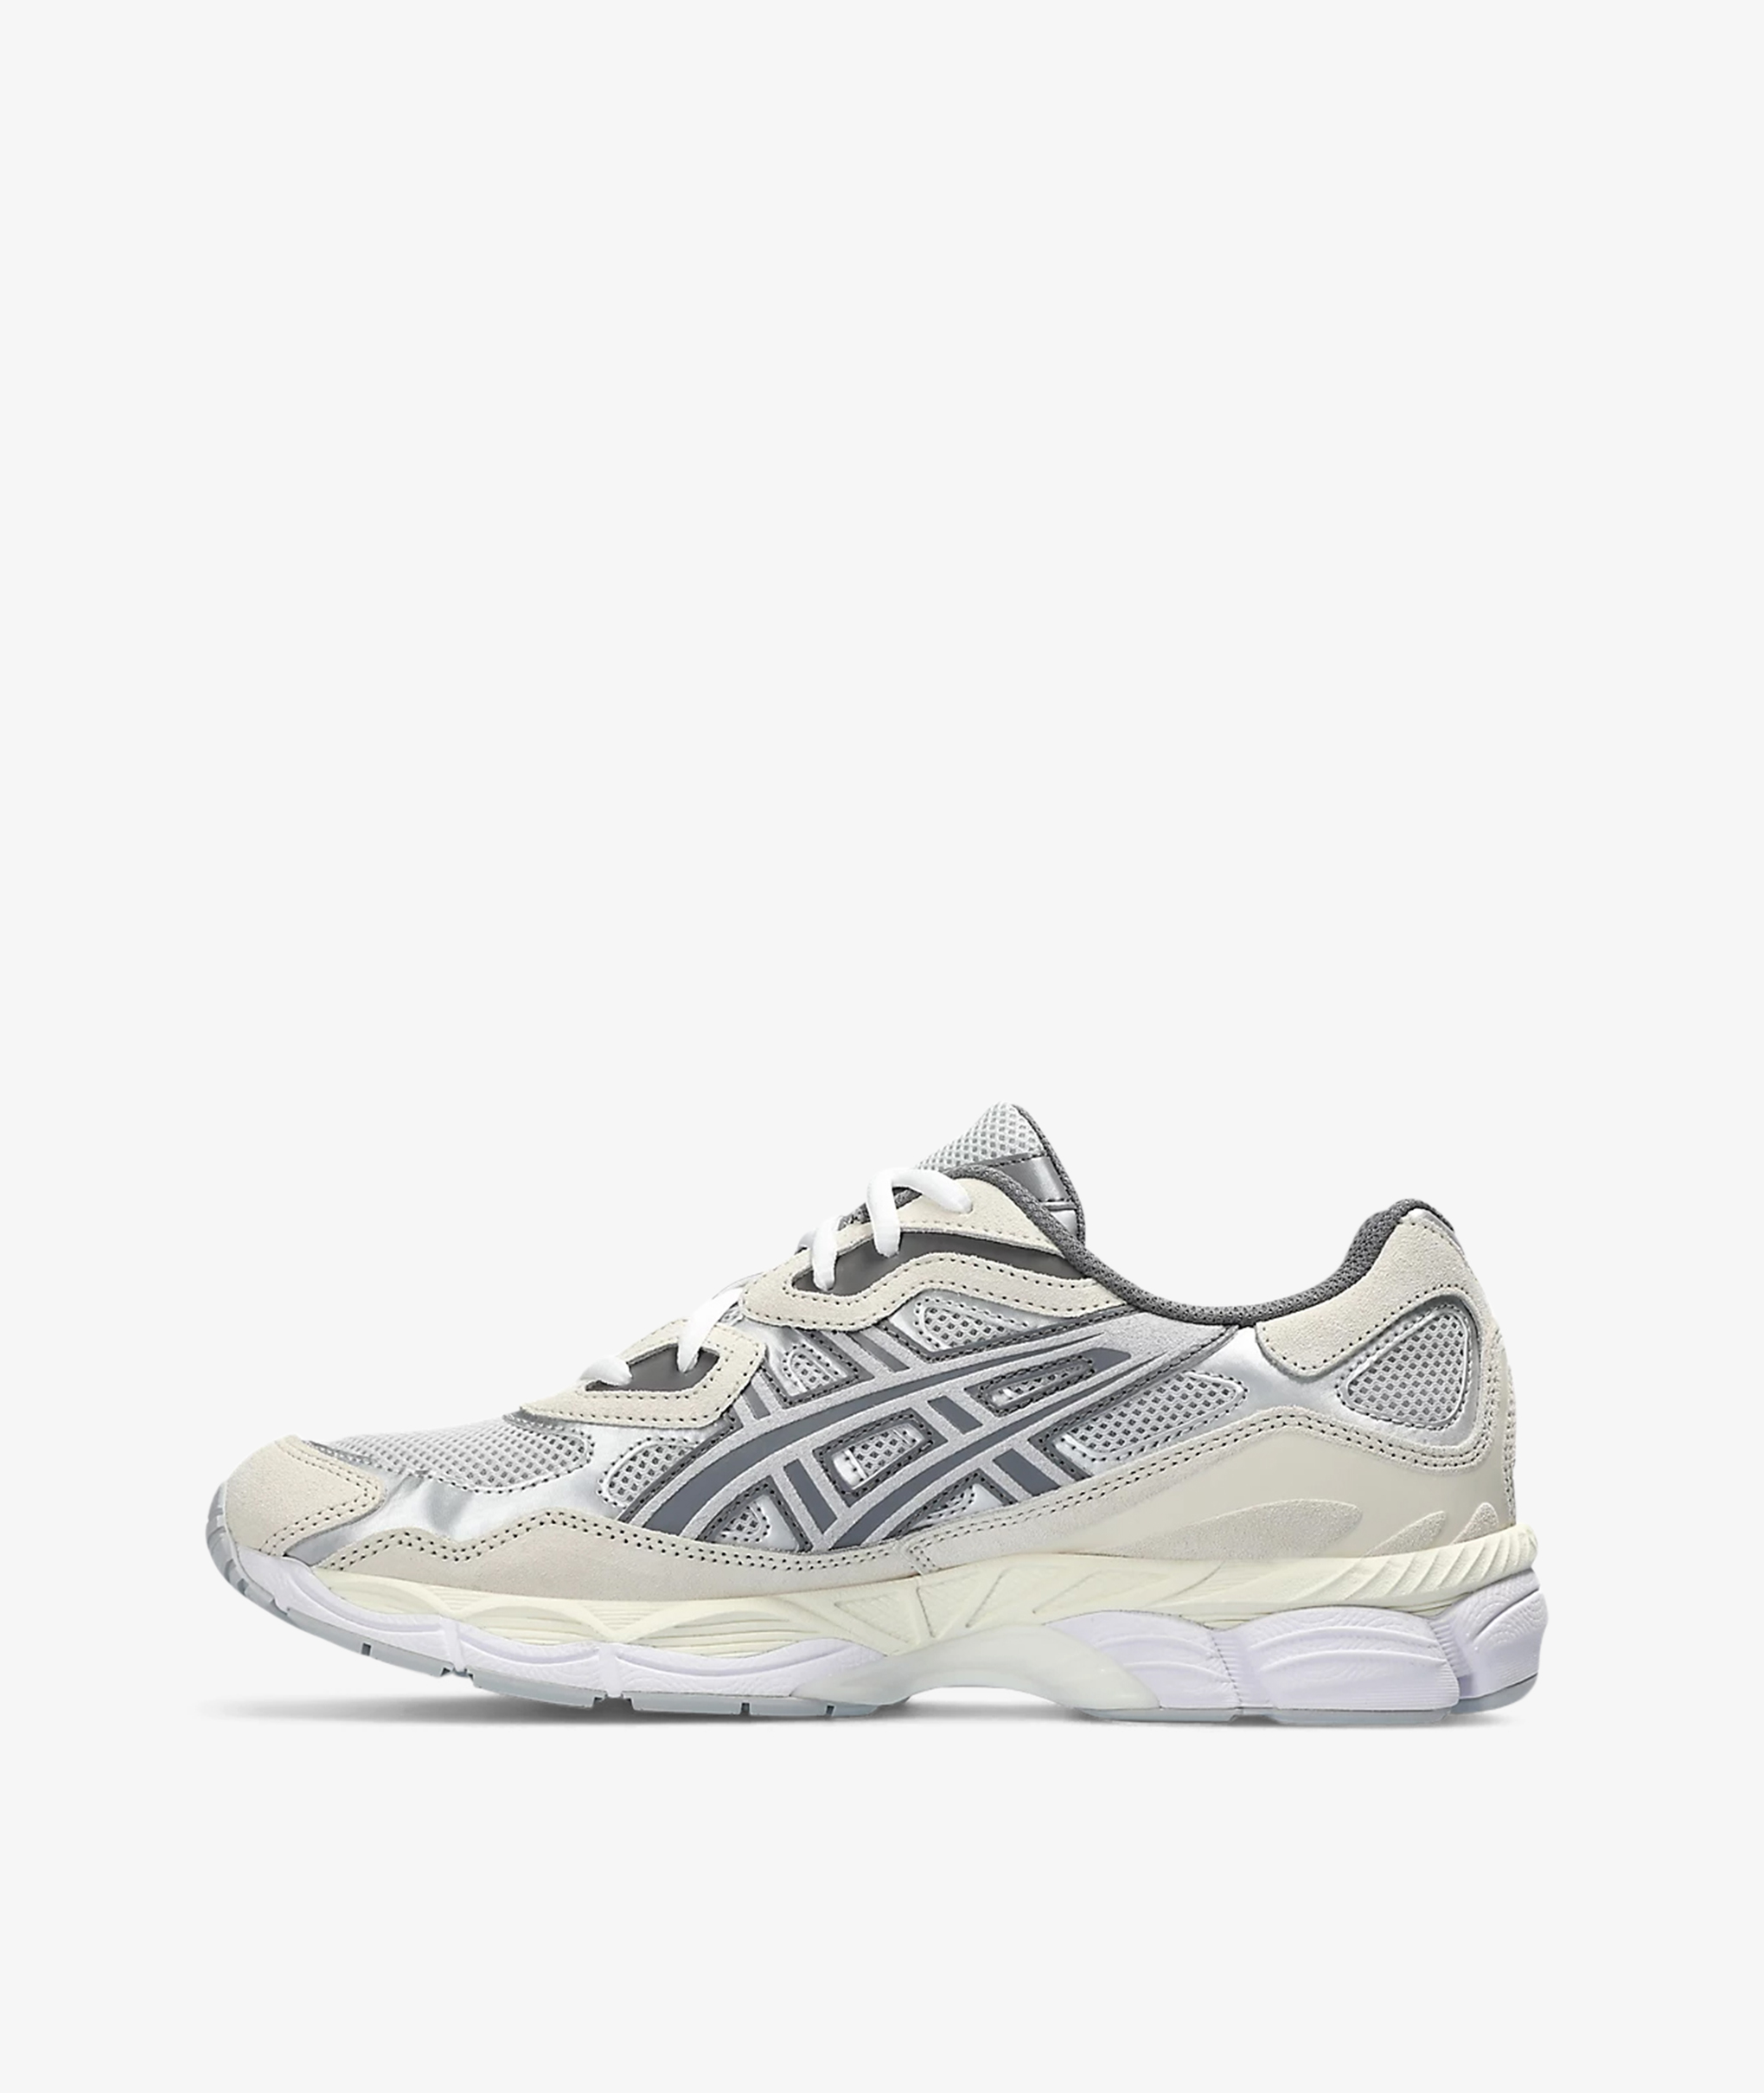 Norse Store | Shipping Worldwide - Asics GEL-NYC - Concrete/Oatmeal